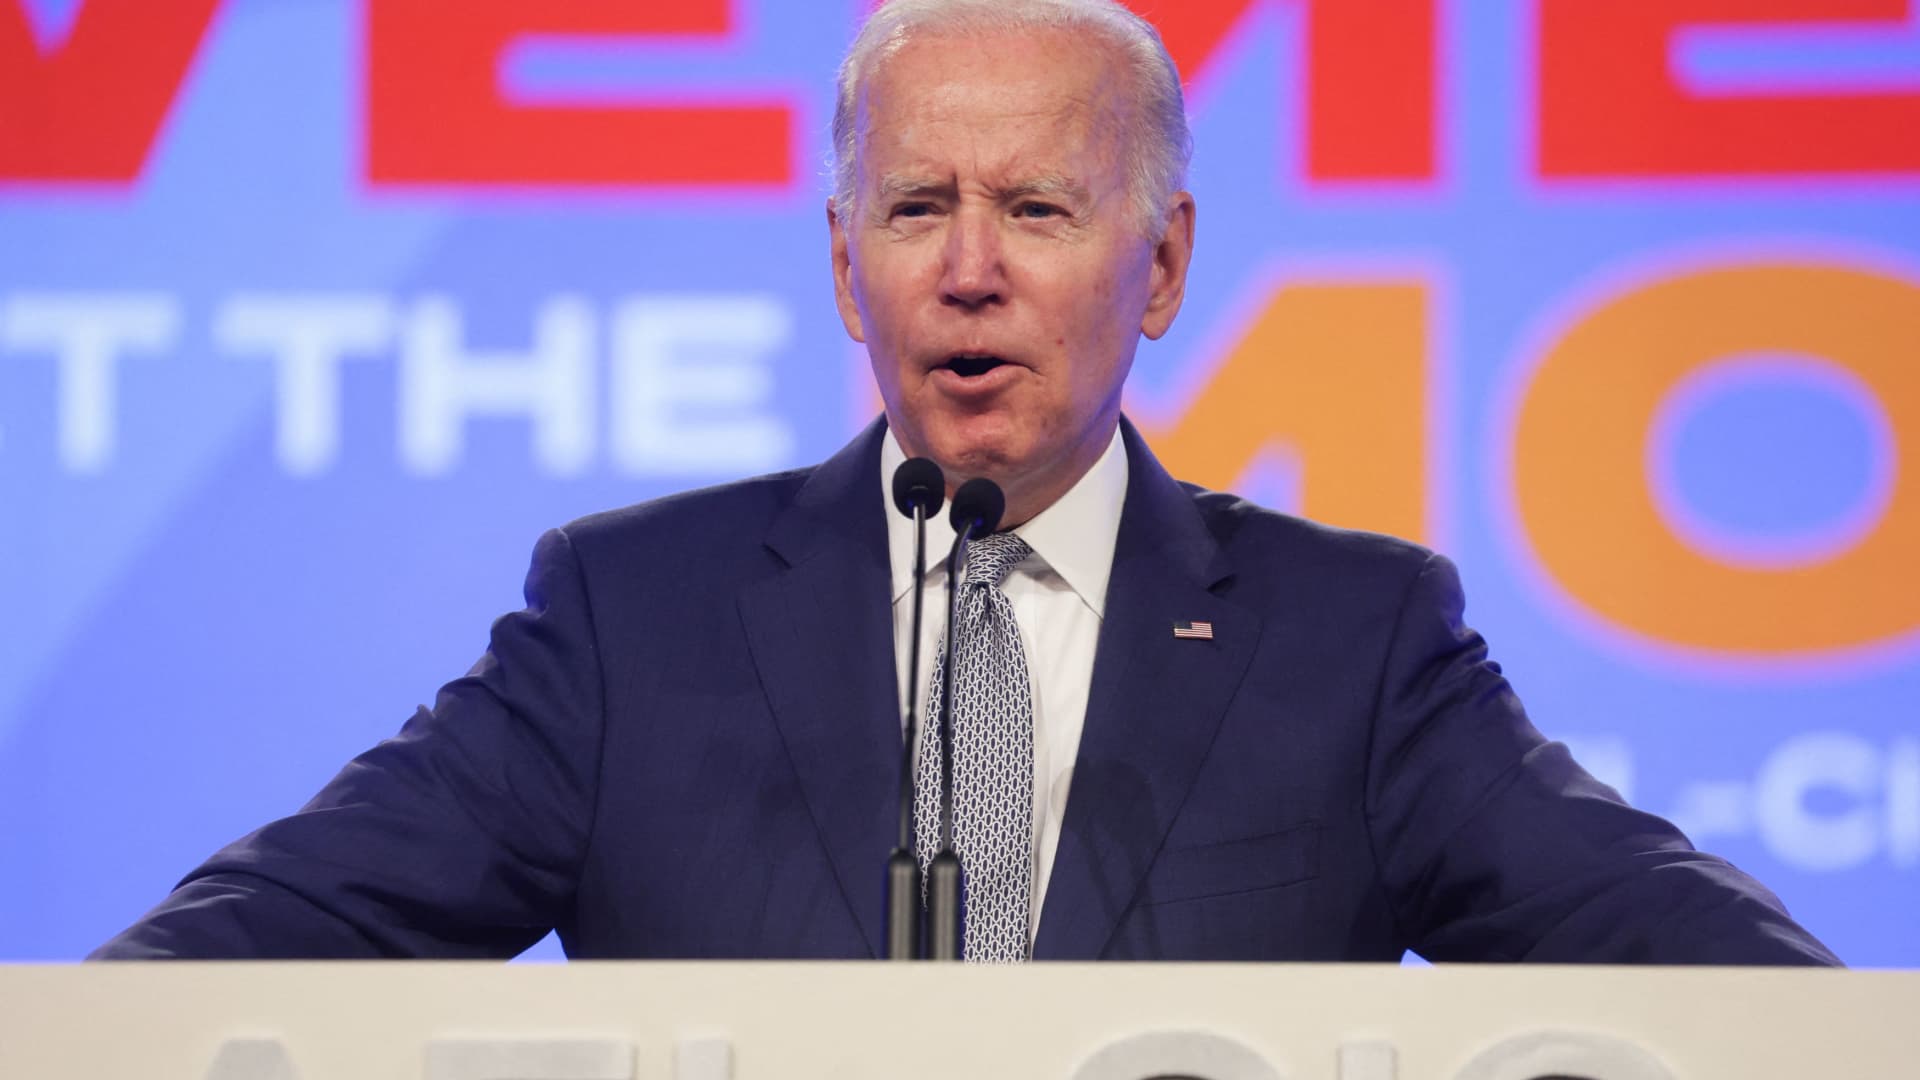 Watch: President Biden calls for federal gas tax holiday